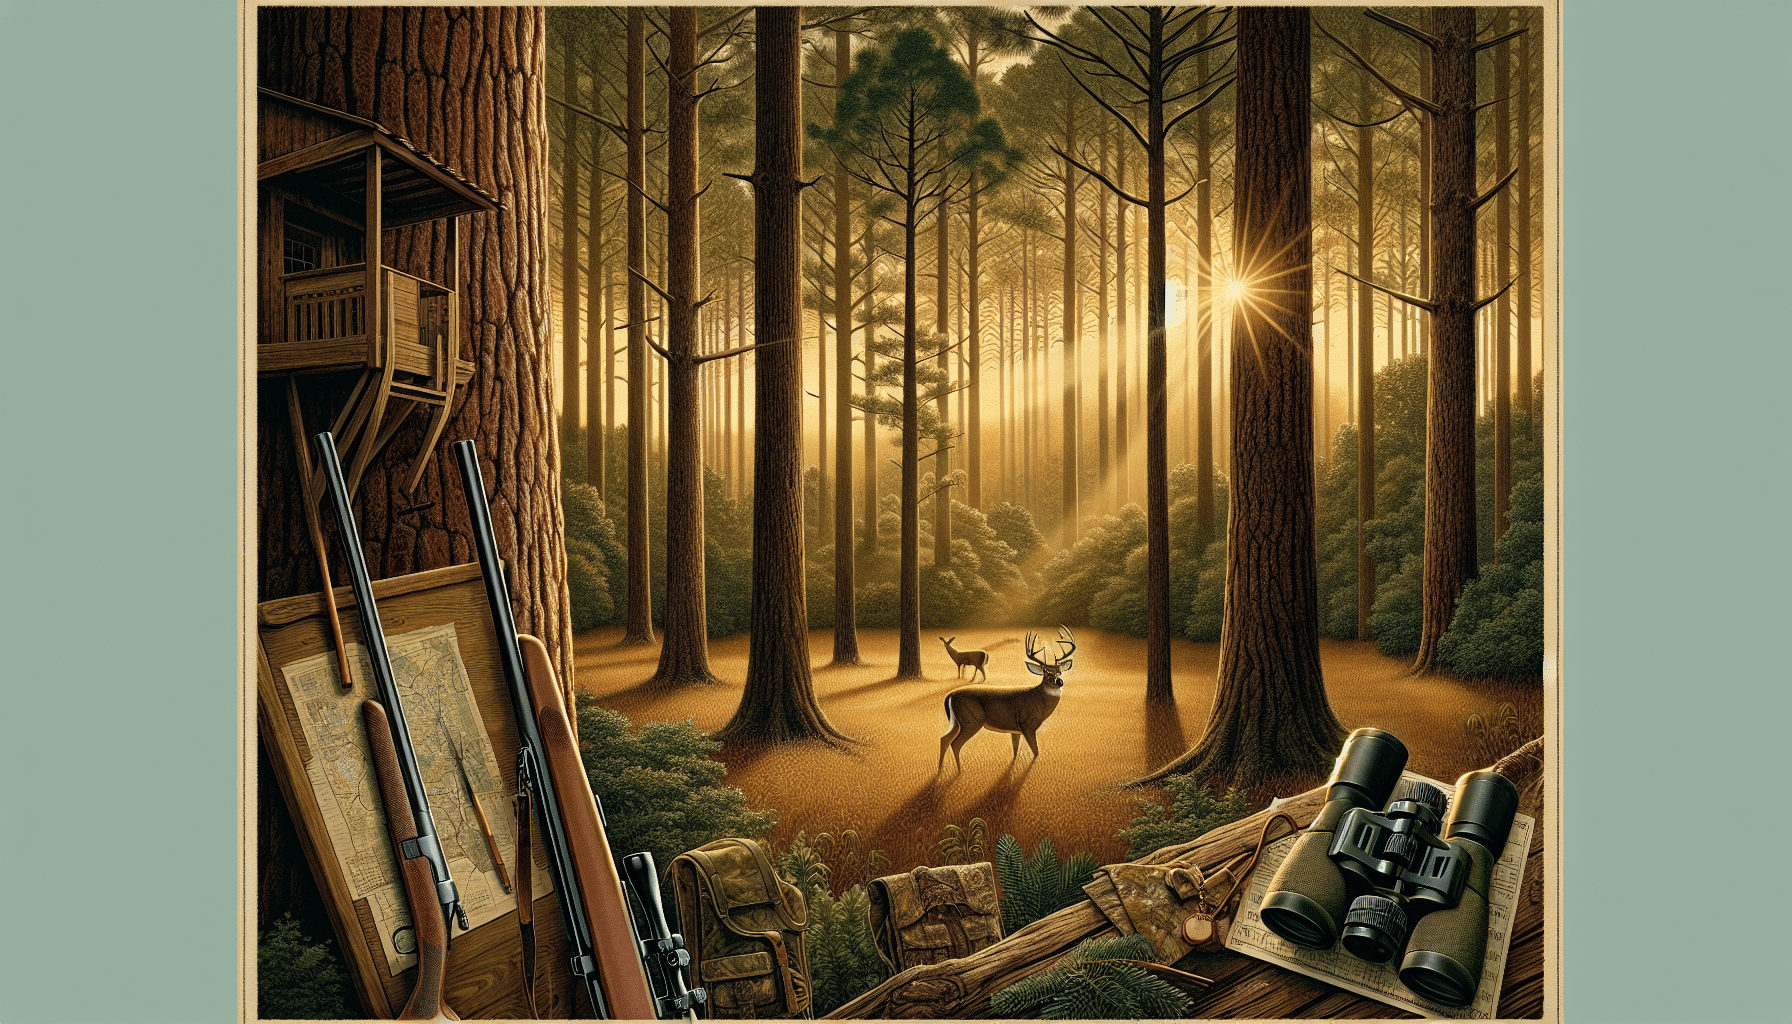 An illustrative image showcasing a tranquil forest scene in Alabama, characterized by towering pine trees and dense underbrush. Gold-hued sunlight filters through the canopy, hinting at a dawn or dusk setting. A couple of distant deer, one with a majestic set of antlers, graze peacefully in a clearing. Scattered around the periphery are elements integral to deer hunting, such as a well-camouflaged tree stand, a pair of binoculars, and a hunting rifle, devoid of any brand markings. The scene captures the essence of deer hunting but holds promise of respectful and conservation-minded practices.